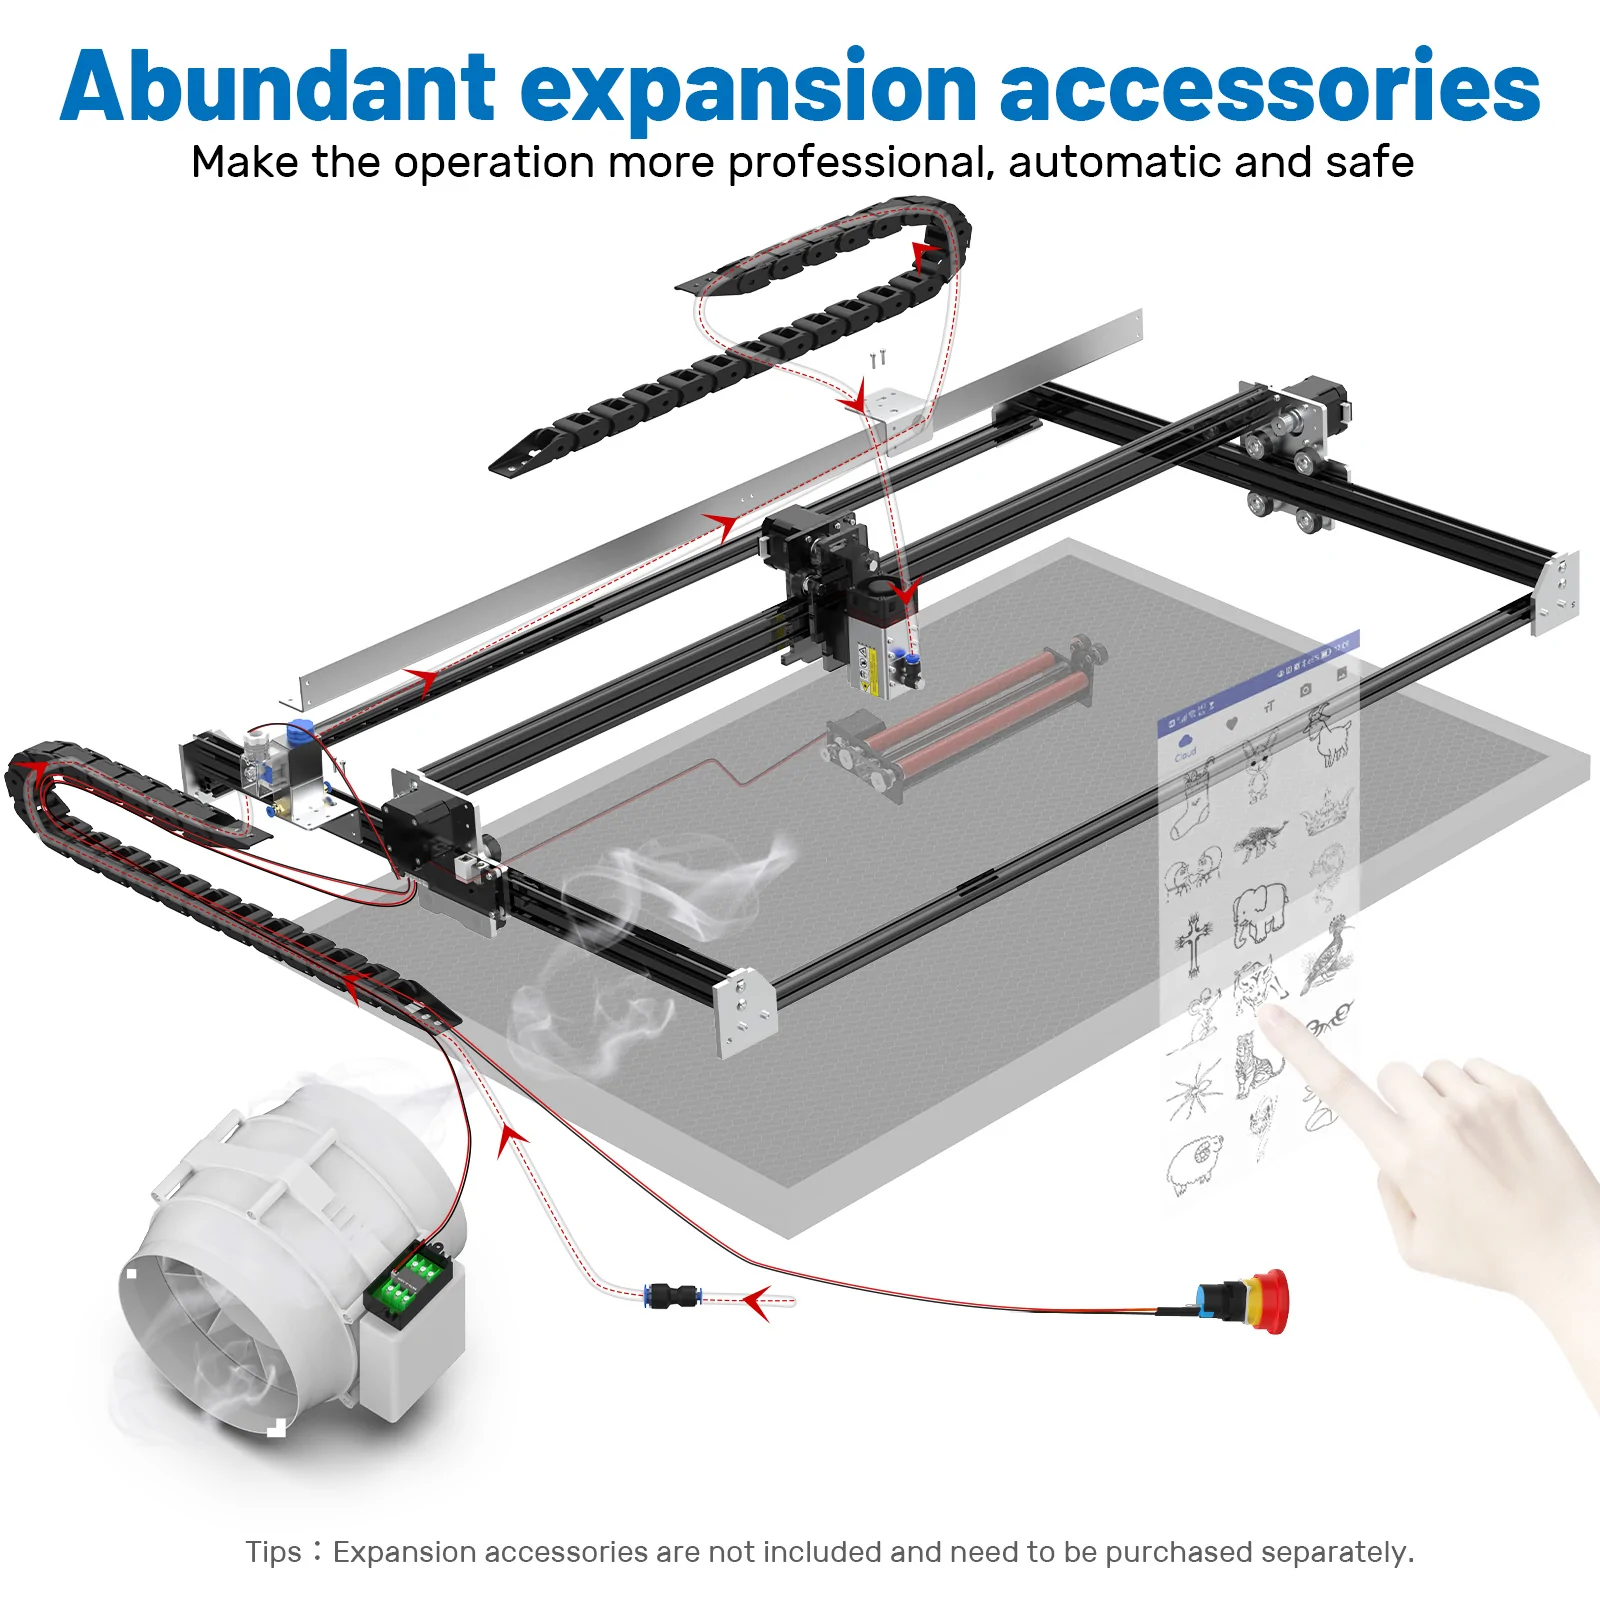 NEJE 3 MAX 11W+ Laser Engraver Cutter, E40 Laser Module, 0.06x0.06mm Fixed Focus, Built-in Air Assist, NEJE WIN Software, Android App Control, 460*810mm